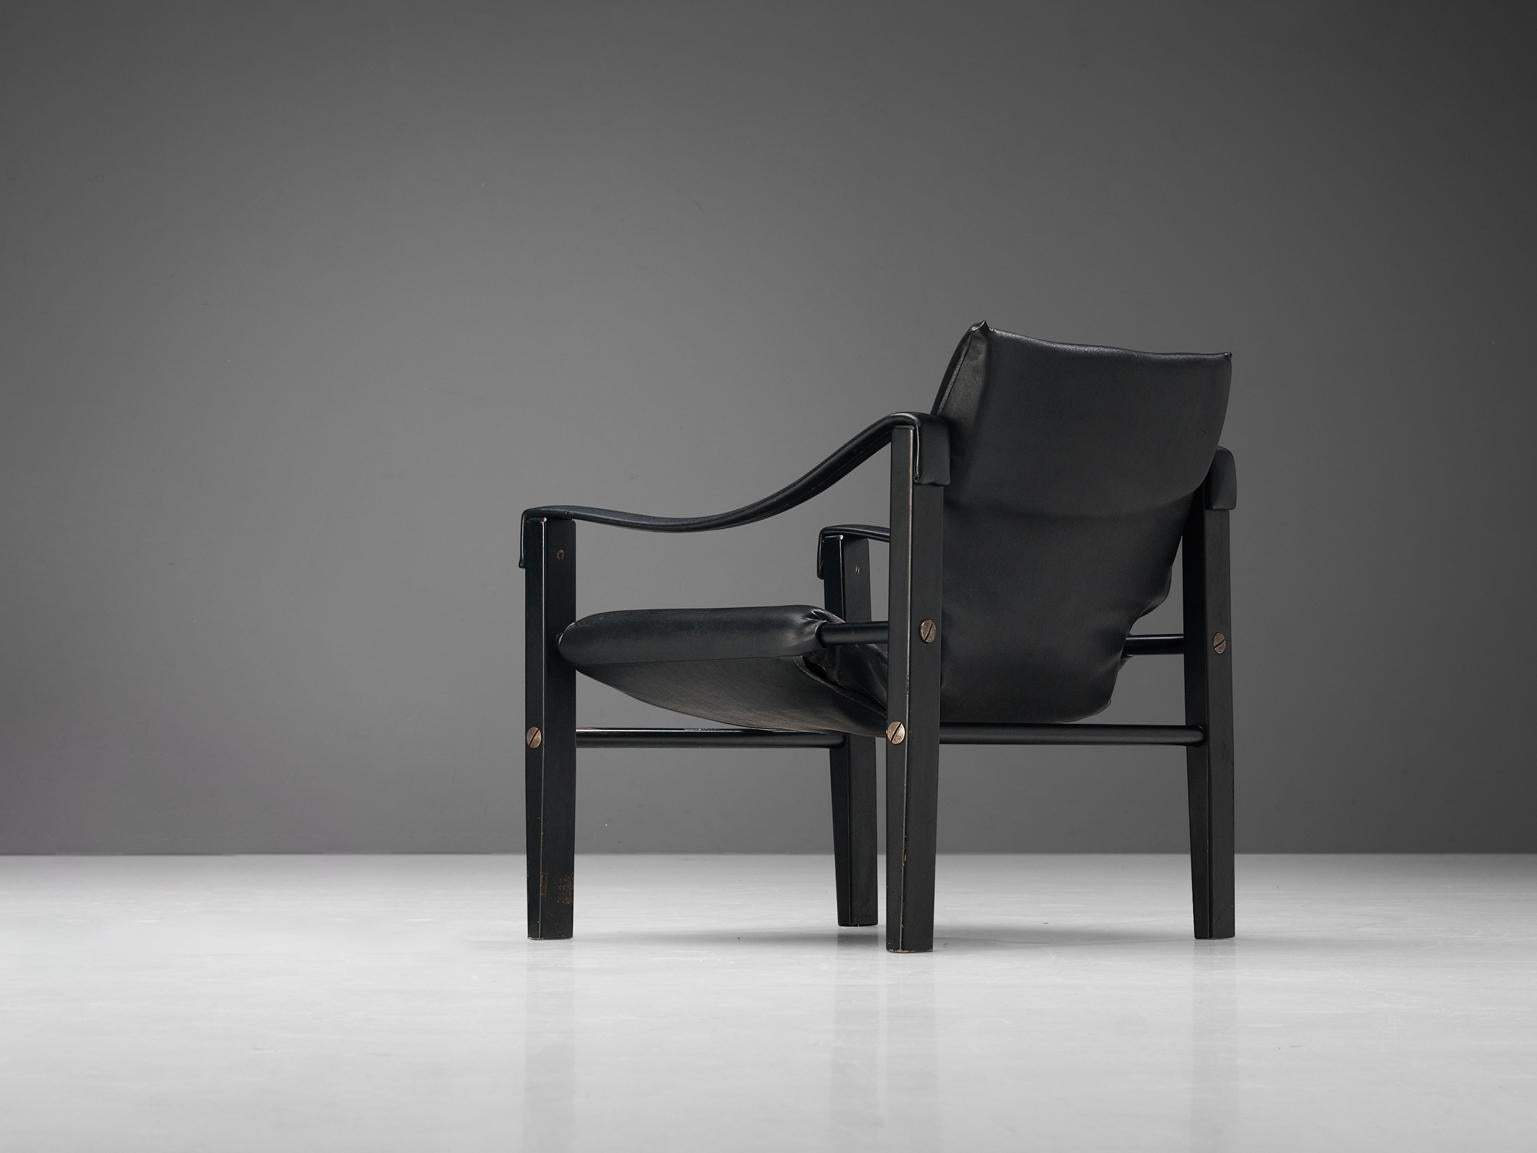 'Safari' lounge chair, vinyl, lacquered wood, metal, United Kingdom, circa 1965

This well-constructed armchair has a solid appearance. The frame is made up of four cube-shaped legs and tubular cross connections. Another feature that is